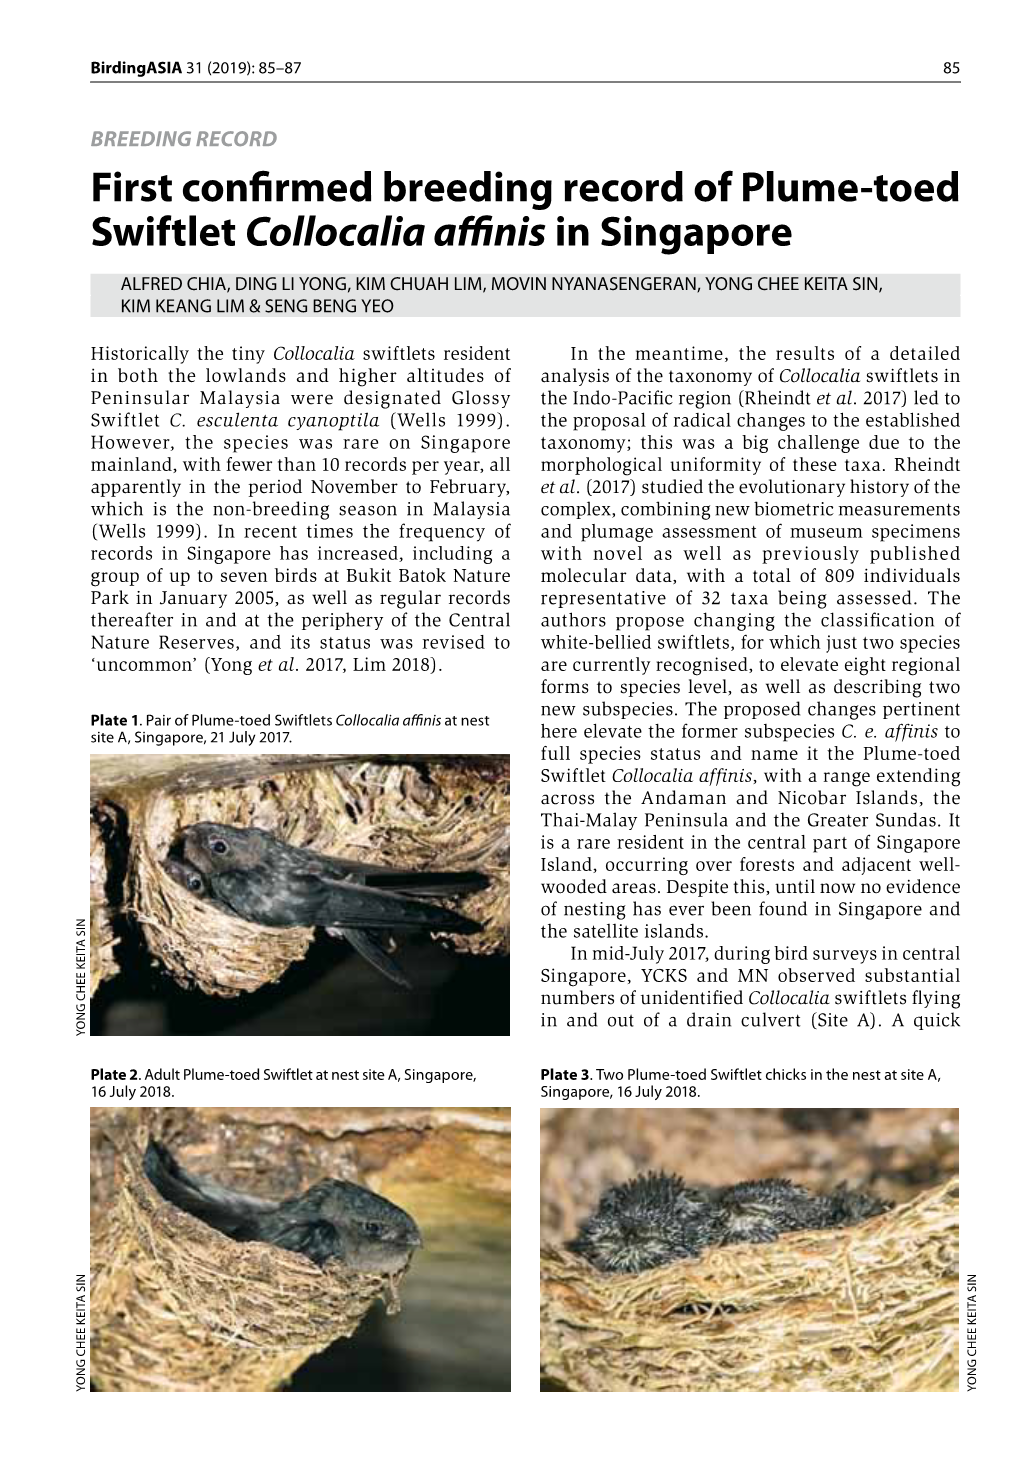 First Confirmed Breeding Record of Plume-Toed Swiftlet Collocalia Affinis in Singapore